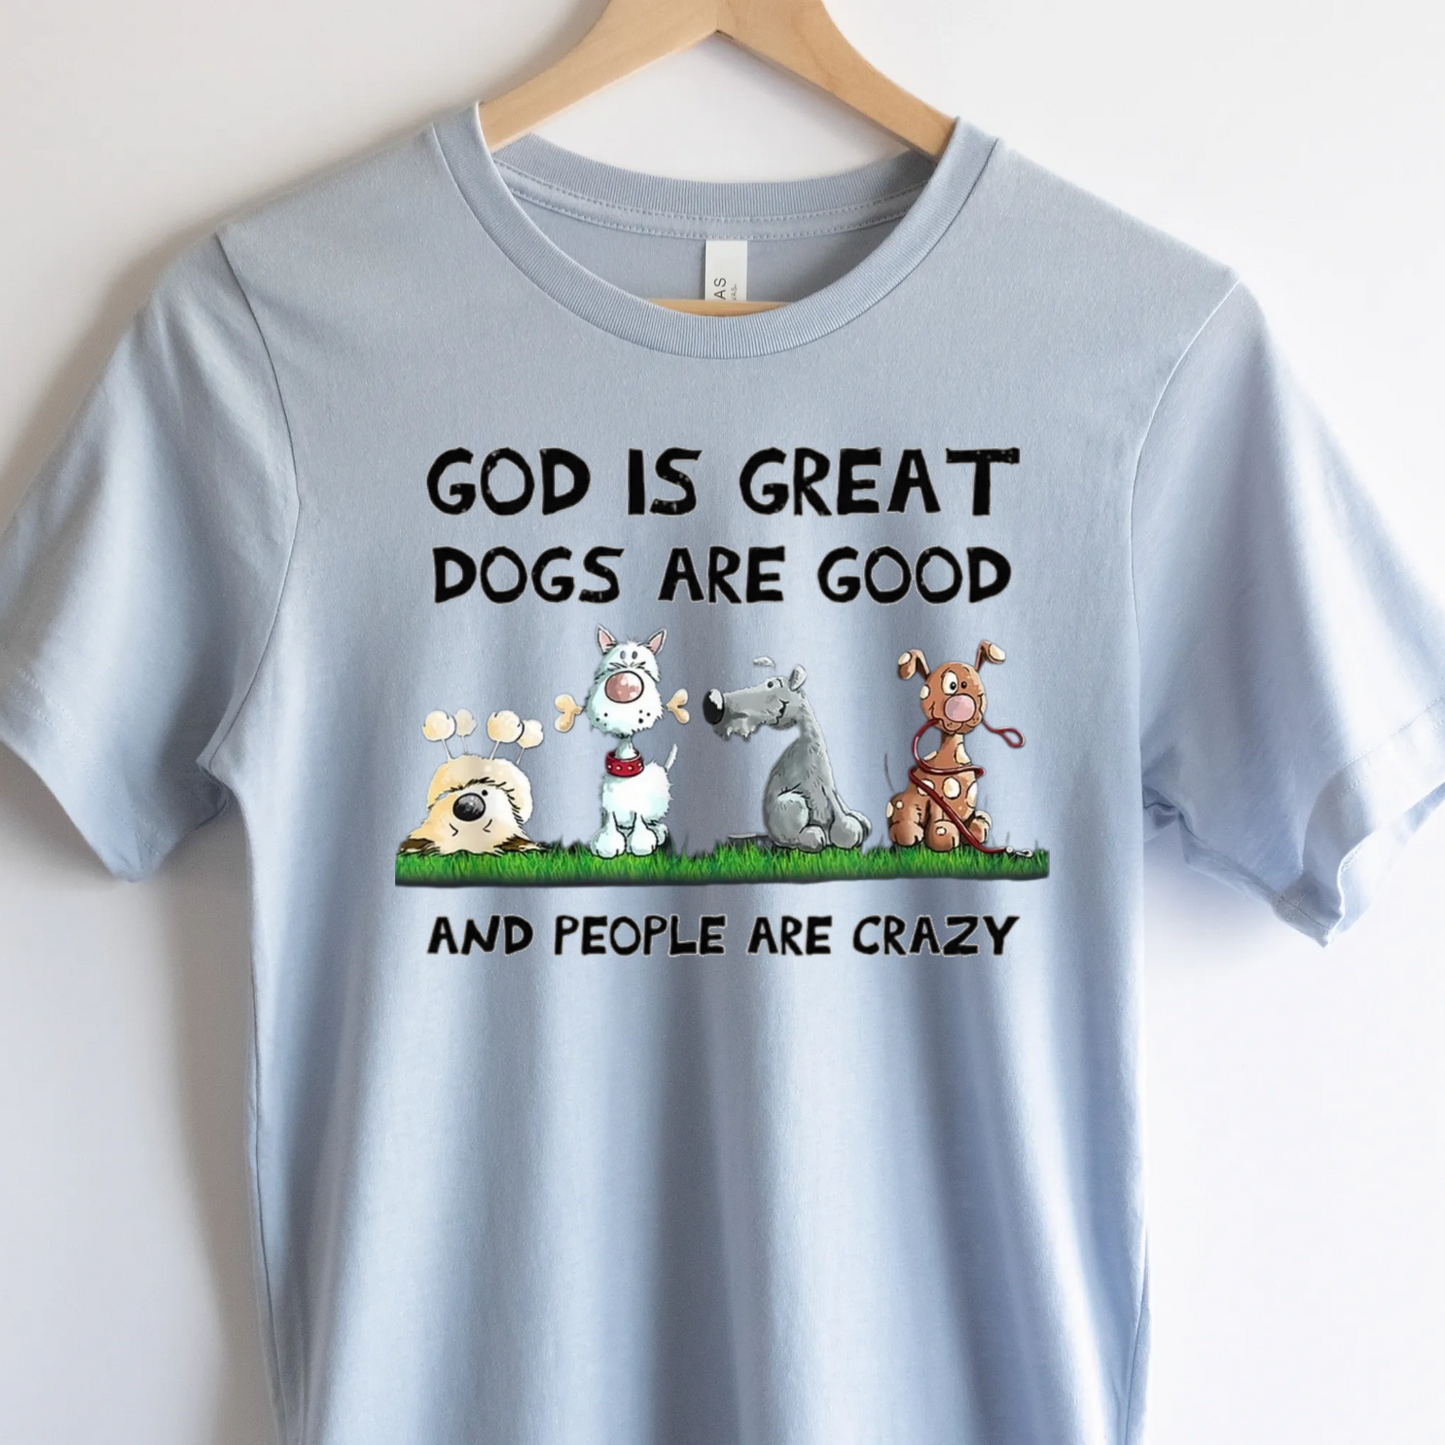 Dogs Are Good T-Shirt